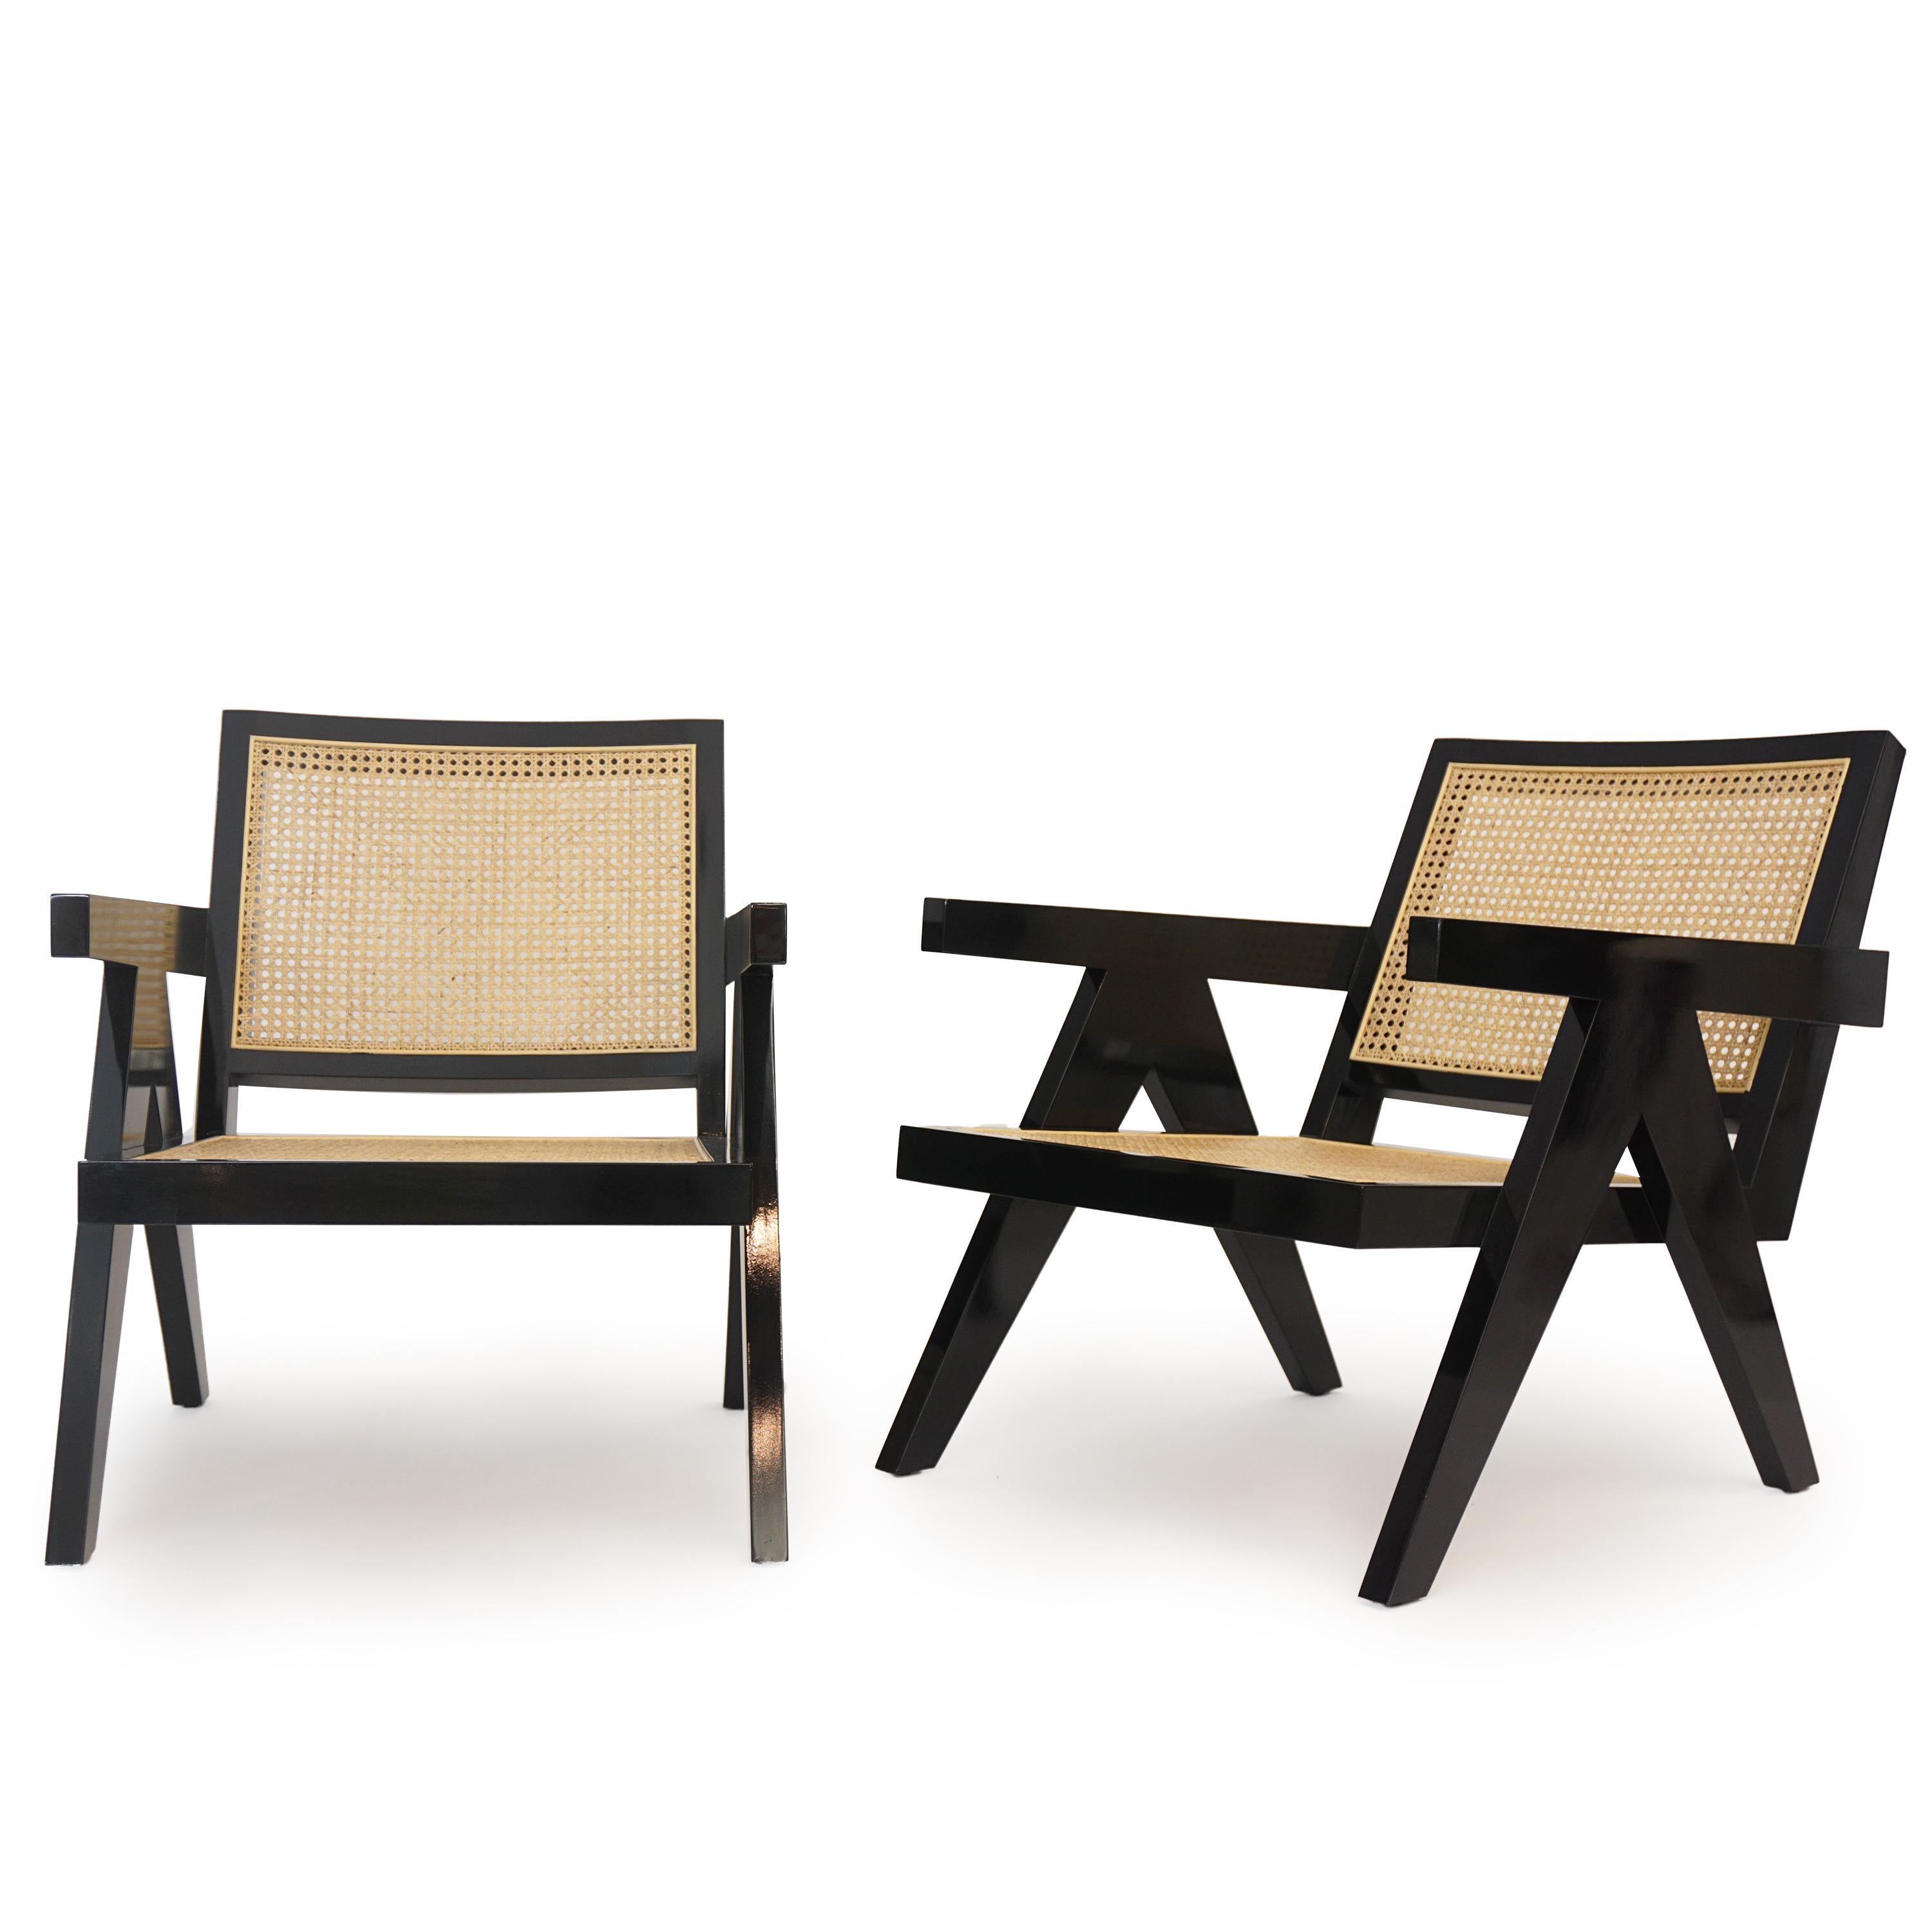 Made to order black armchair made with natural cane rattan and mahogany wood painted black. 

Measurements: Outside - 28